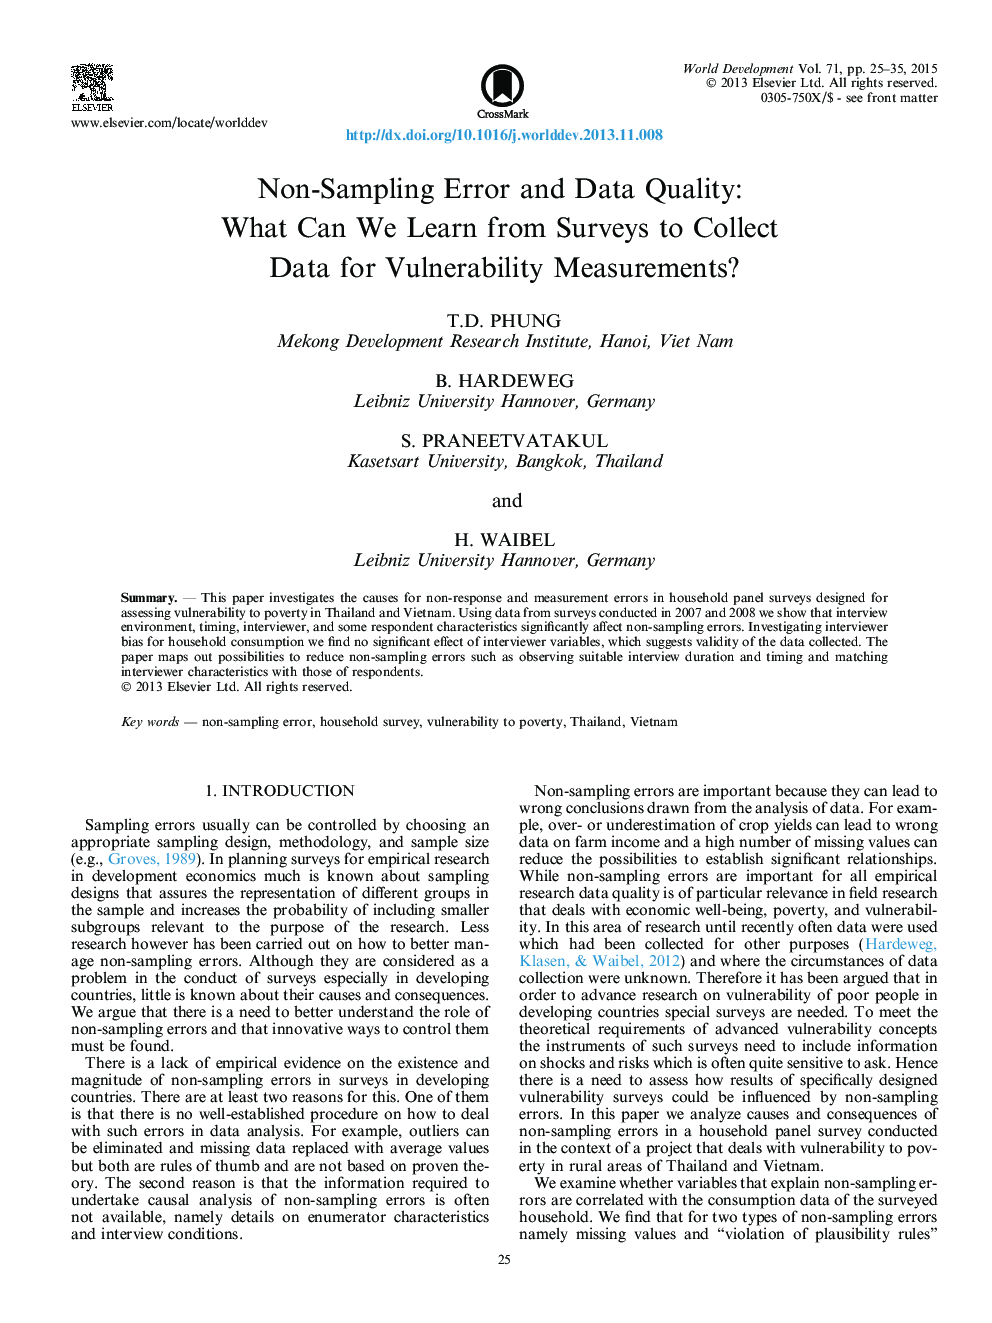 Non-Sampling Error and Data Quality: What Can We Learn from Surveys to Collect Data for Vulnerability Measurements?